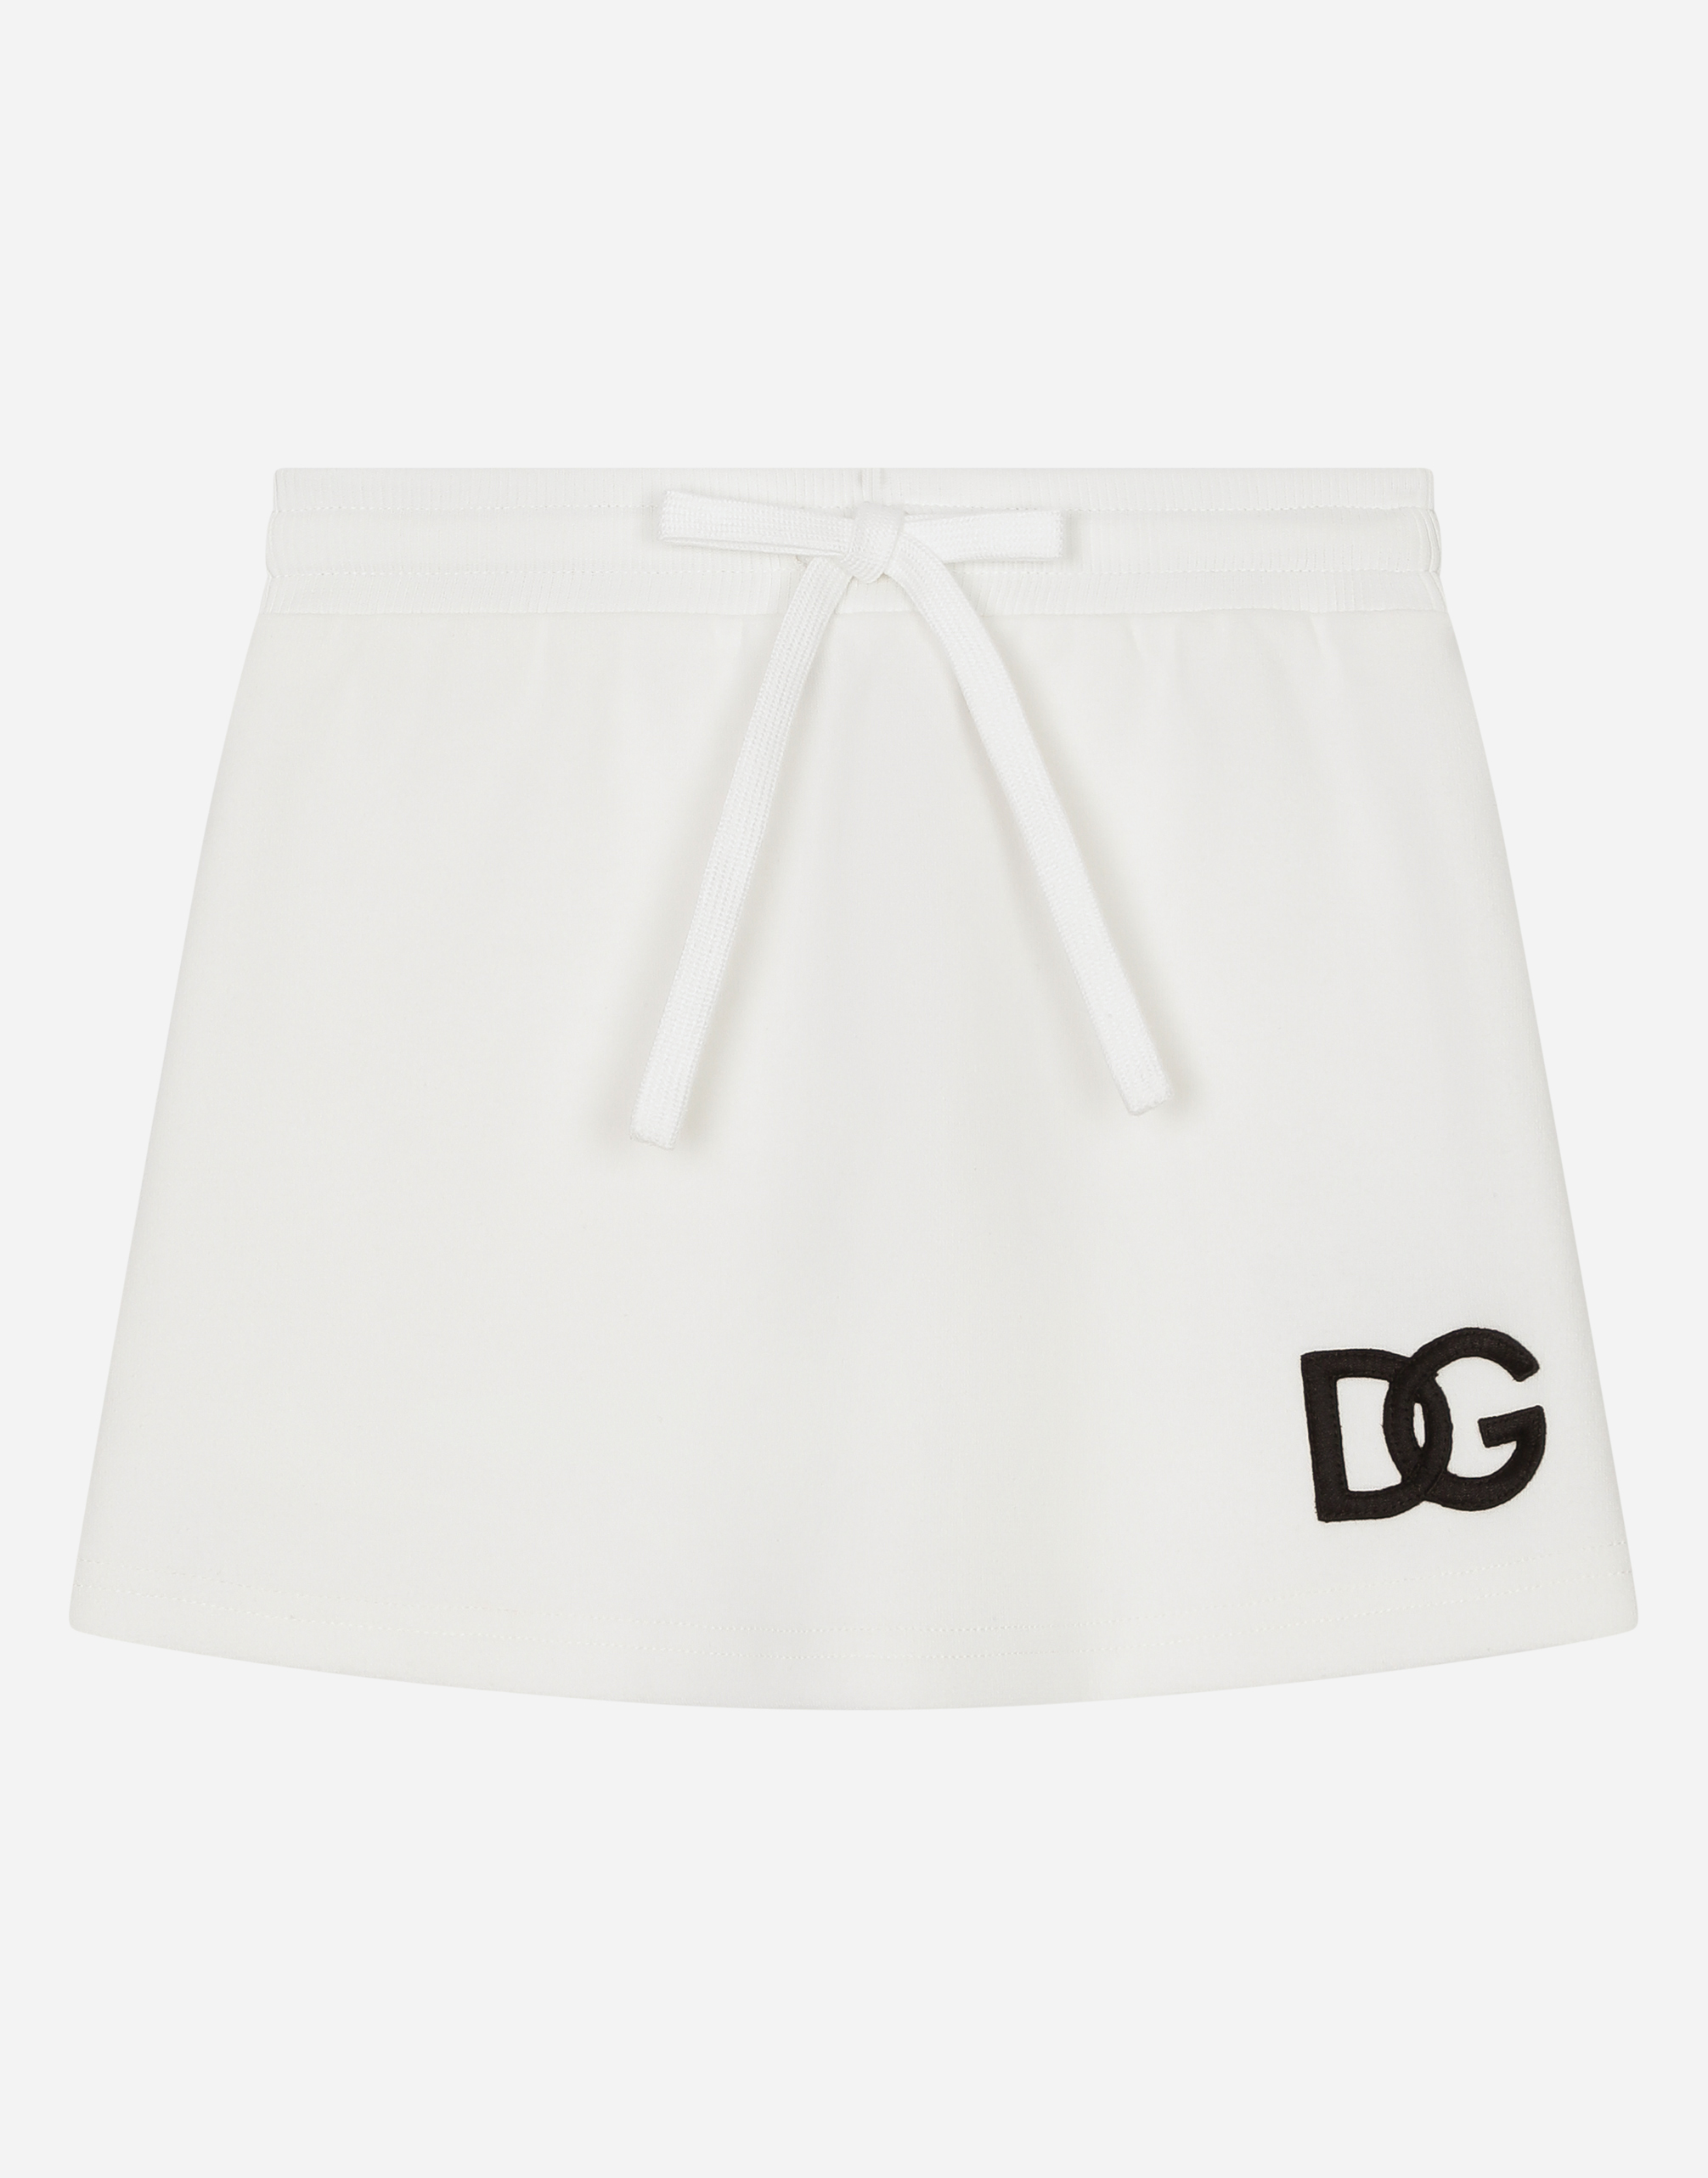 Dolce & Gabbana Kids' Short Jersey Skirt With Dg Logo Embroidery In White